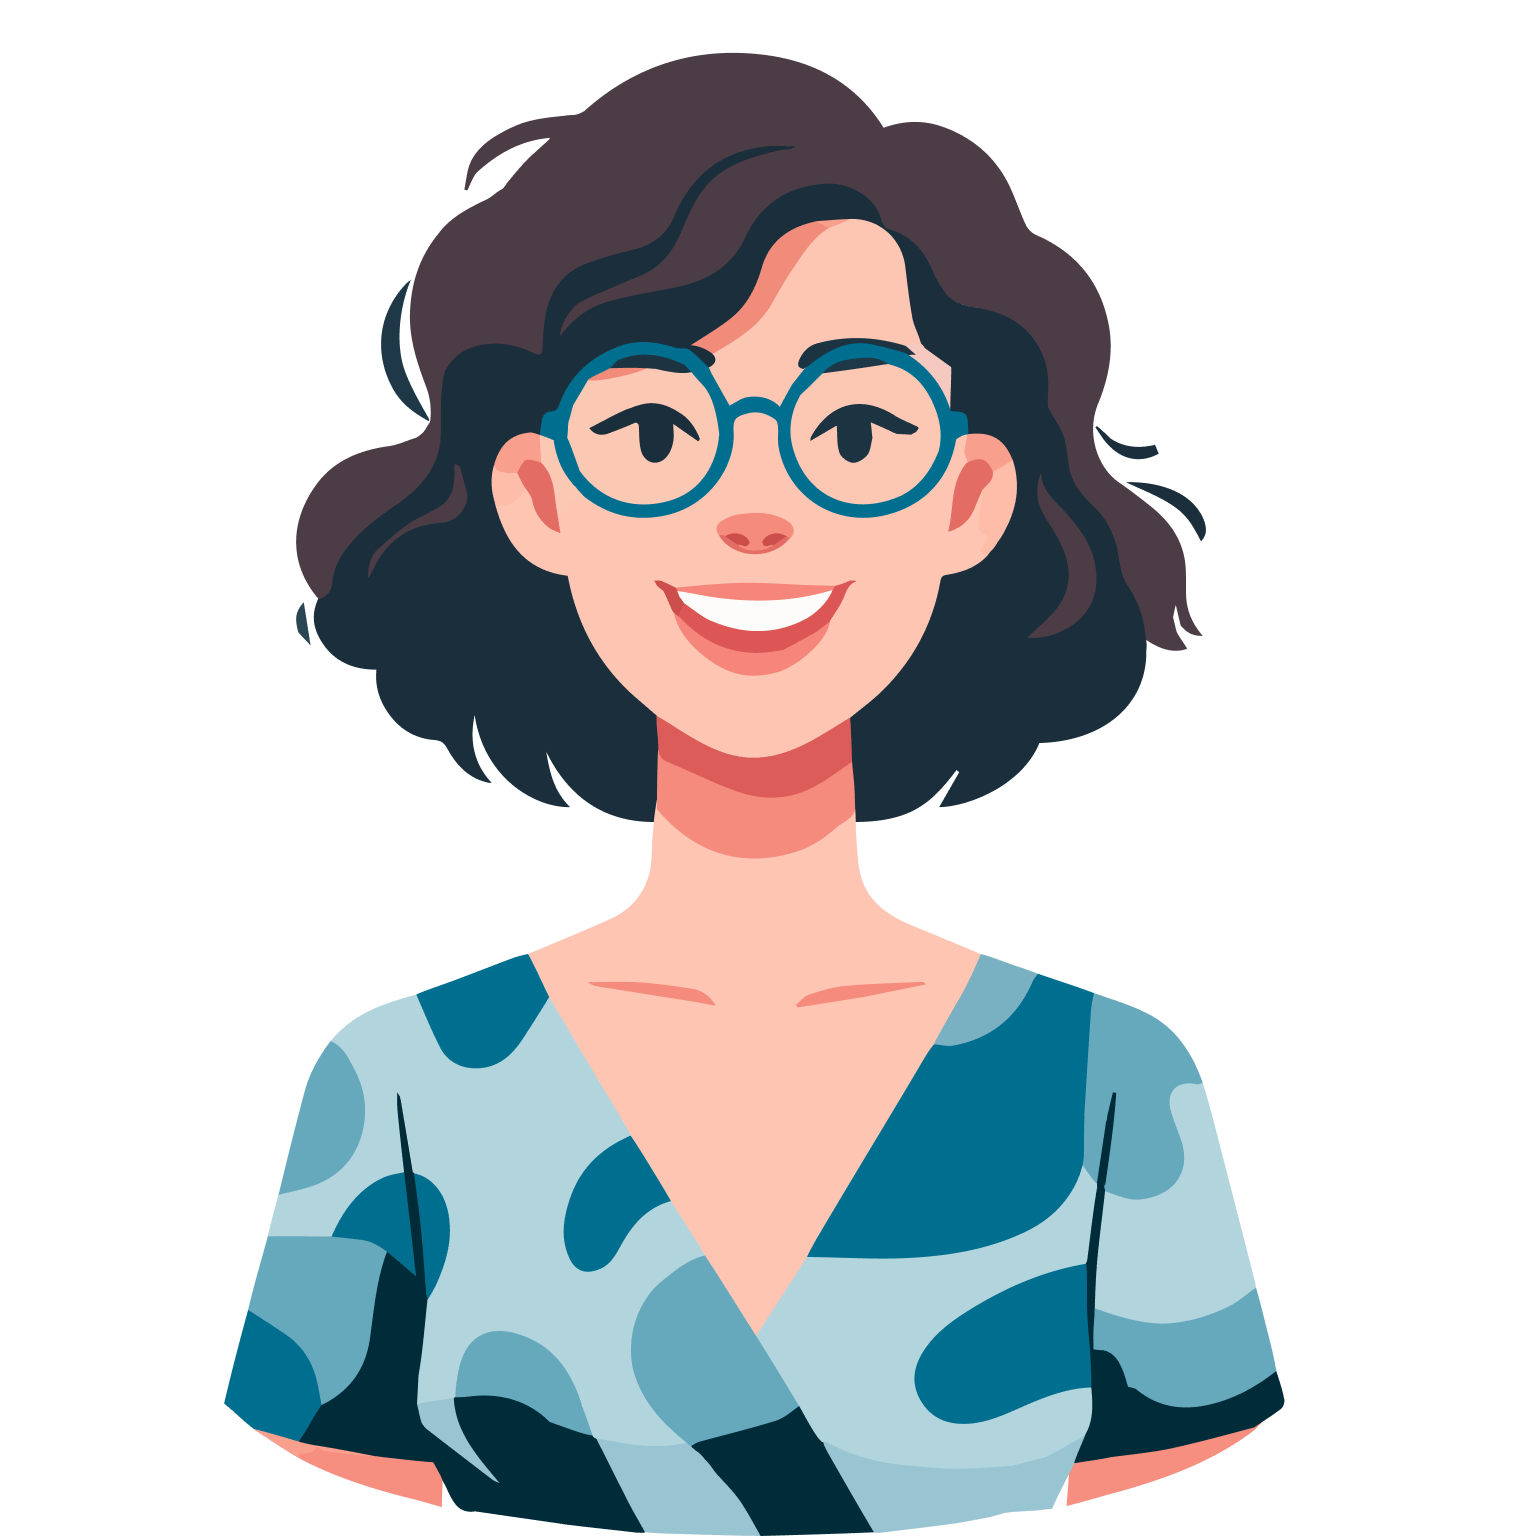 illustration of a smiling latine woman with short, dark, curly hair and wearing glasses